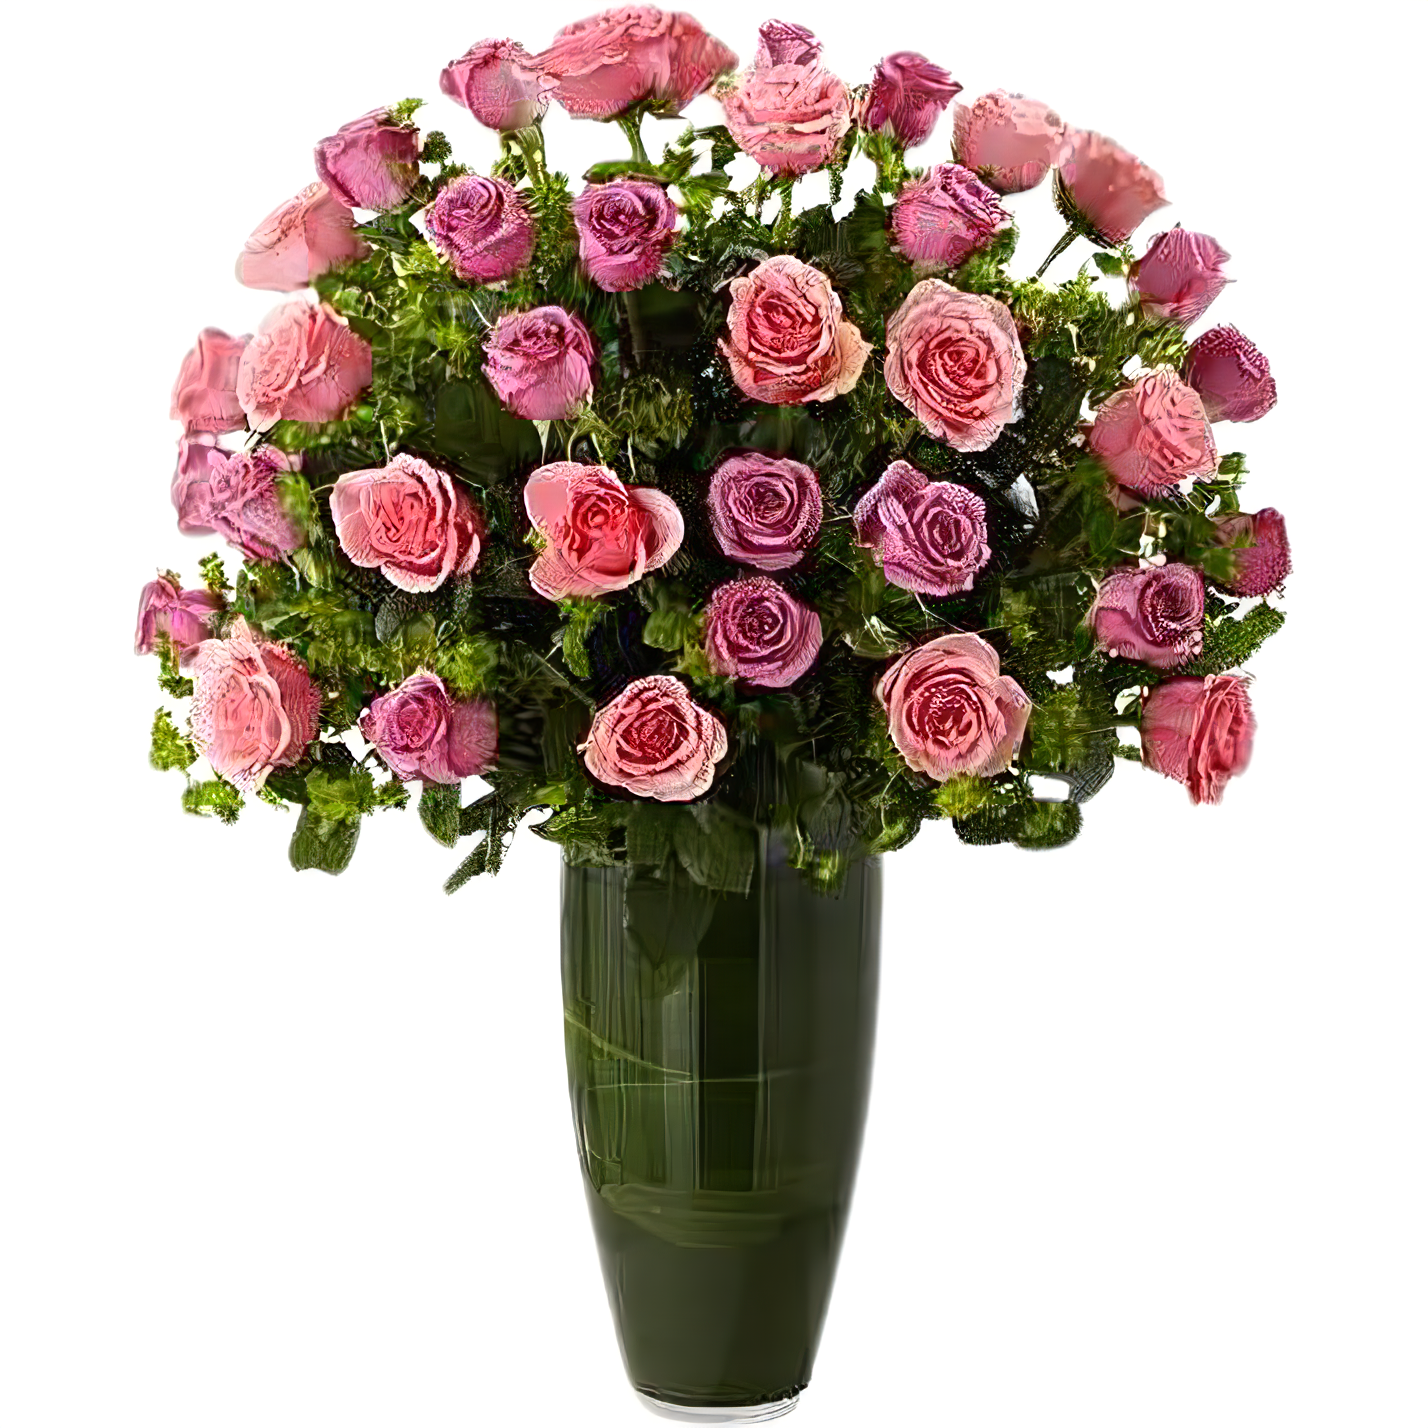 Manhattan Flower Delivery - Luxury Rose Bouquet - 24 Premium Pink & Lavender Long Stem Roses - Products > Luxury Collection